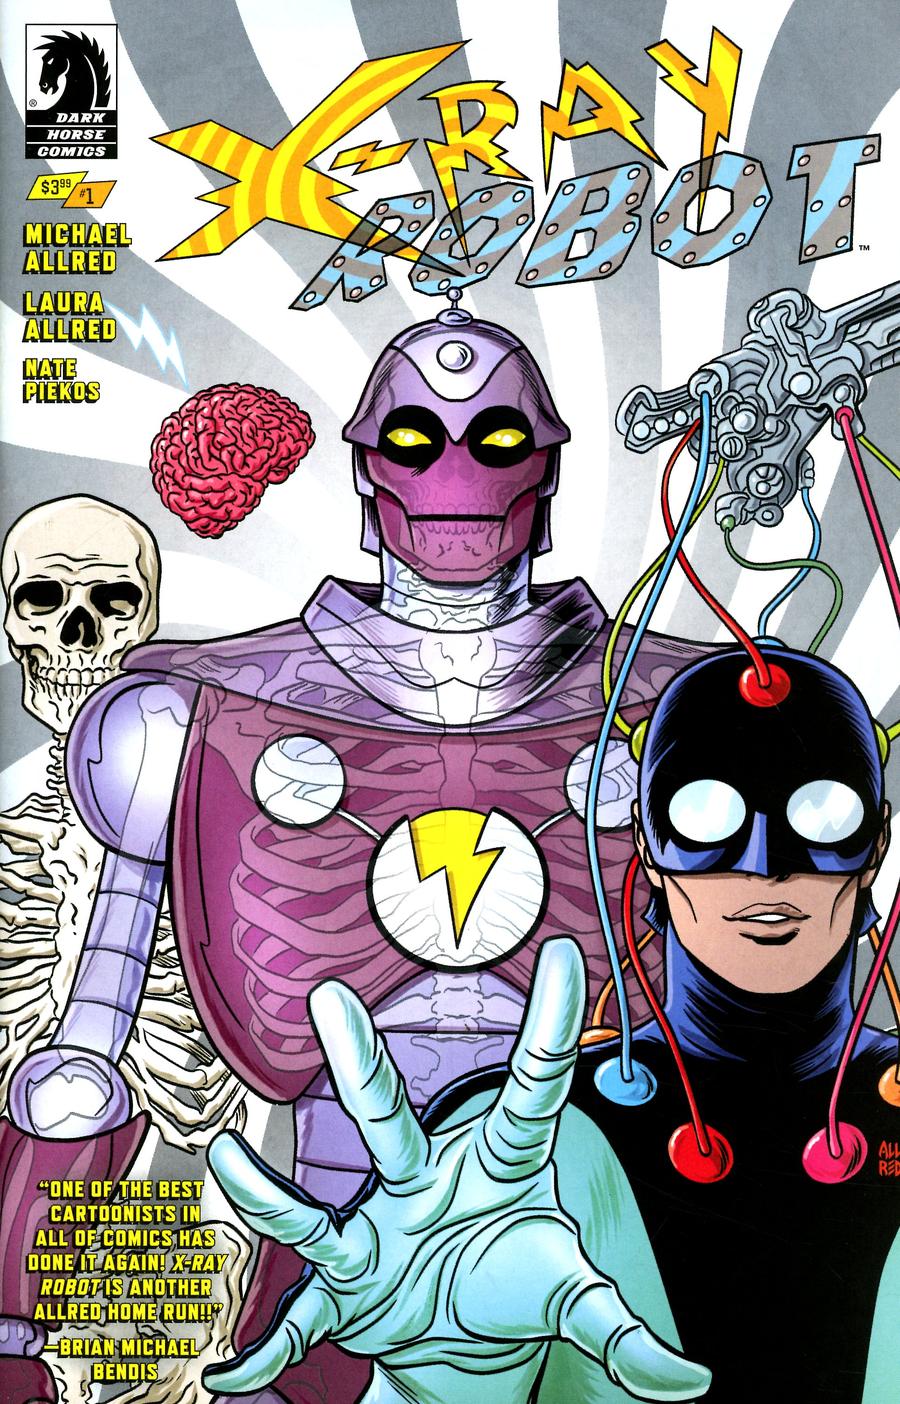 X-Ray Robot #1 Cover A Regular Michael Allred Cover